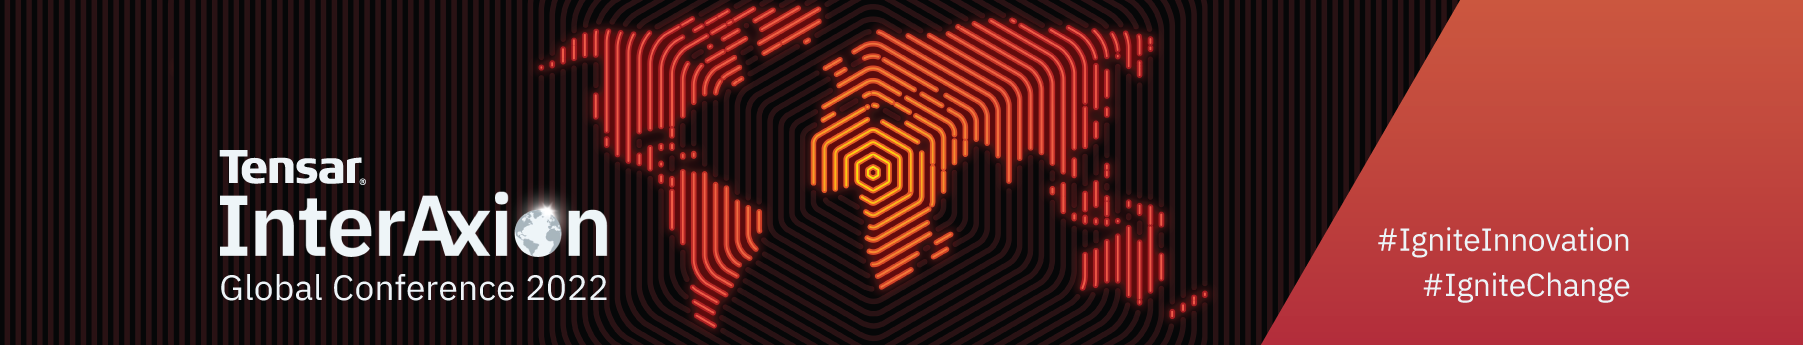 horizontal banner of the globe, with land in red and ocean in black; textured hexagon pattern over the imagery; Tensar InterAxion Global Conference 2022